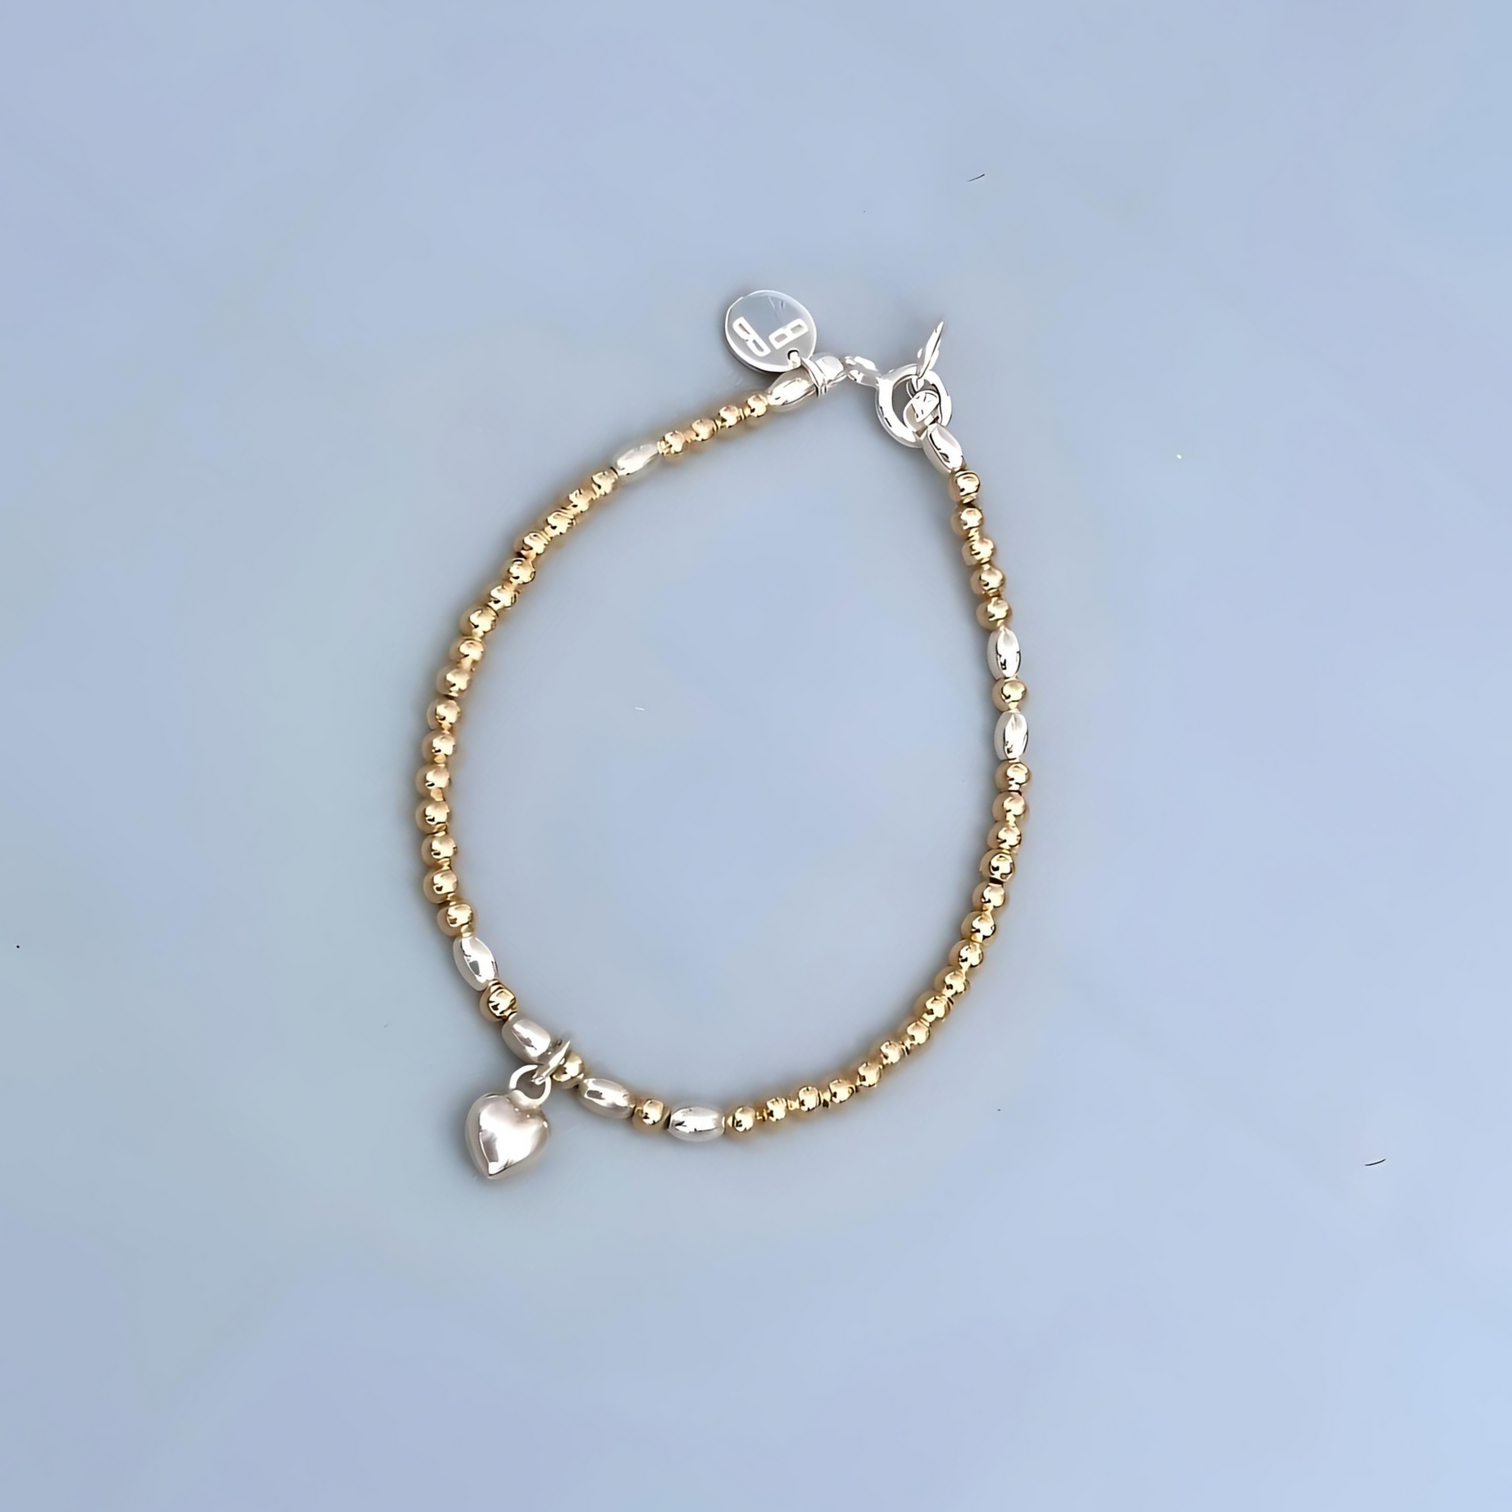 The LeBijouBijou Streak of Gold Bracelet made with rosé gold sterling silver and a heart shaped charm.